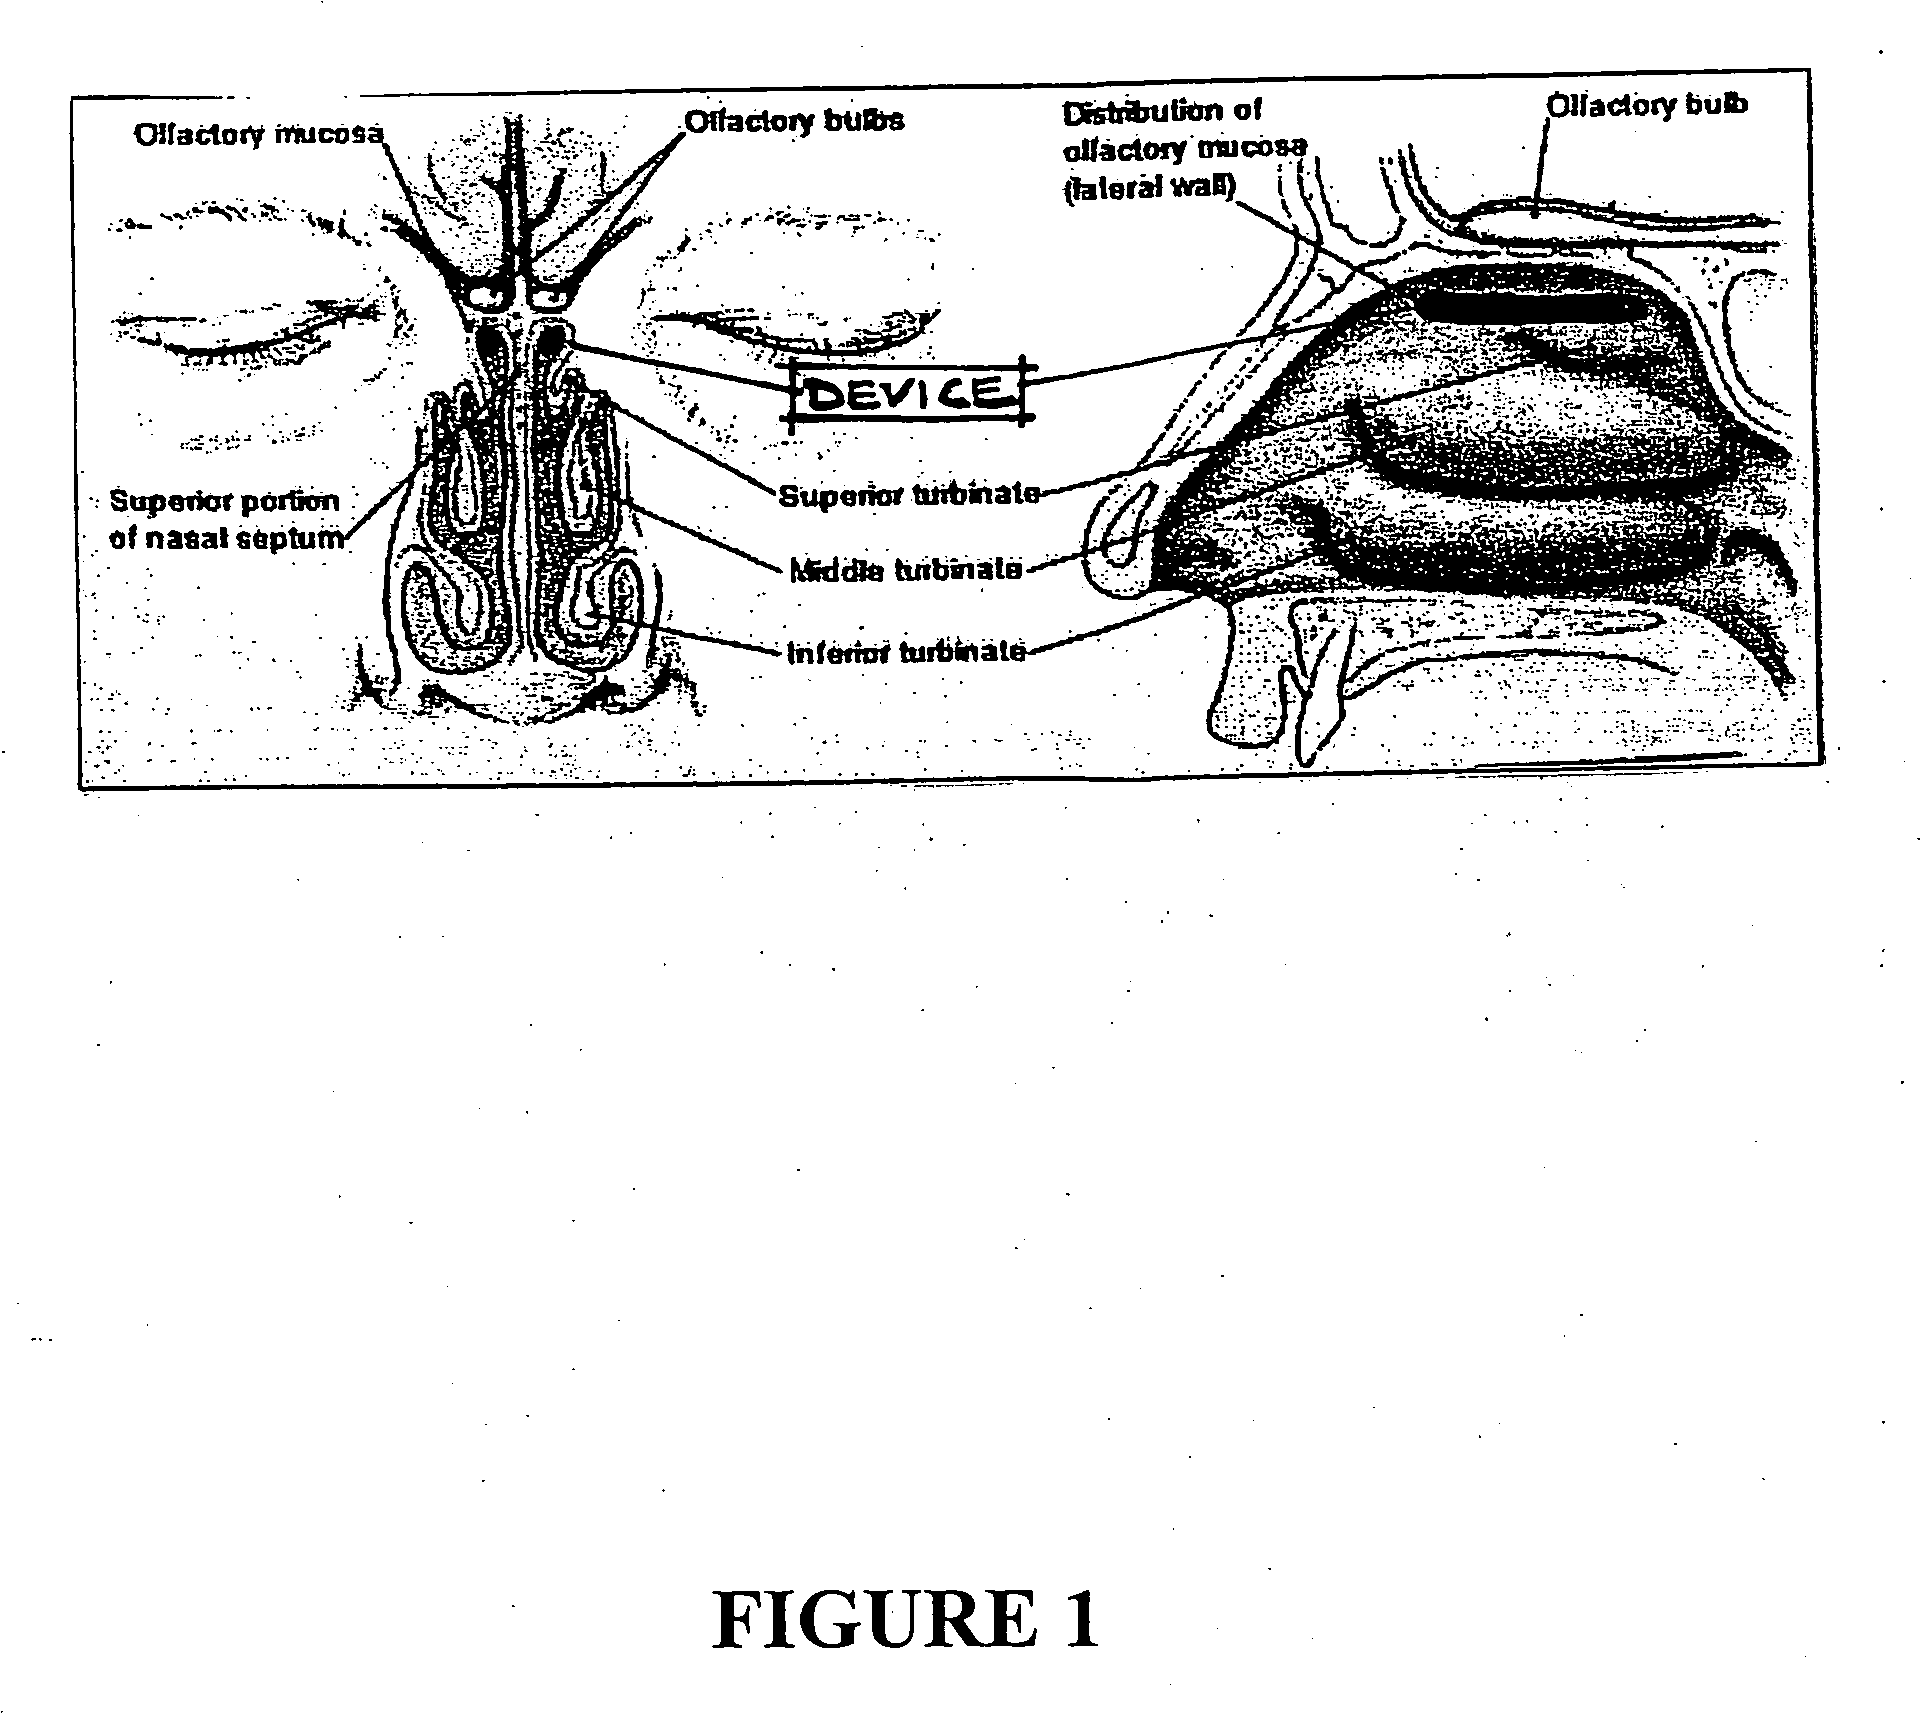 Apparatus and methods for diet and weight control by suppressing the sense of smell and taste